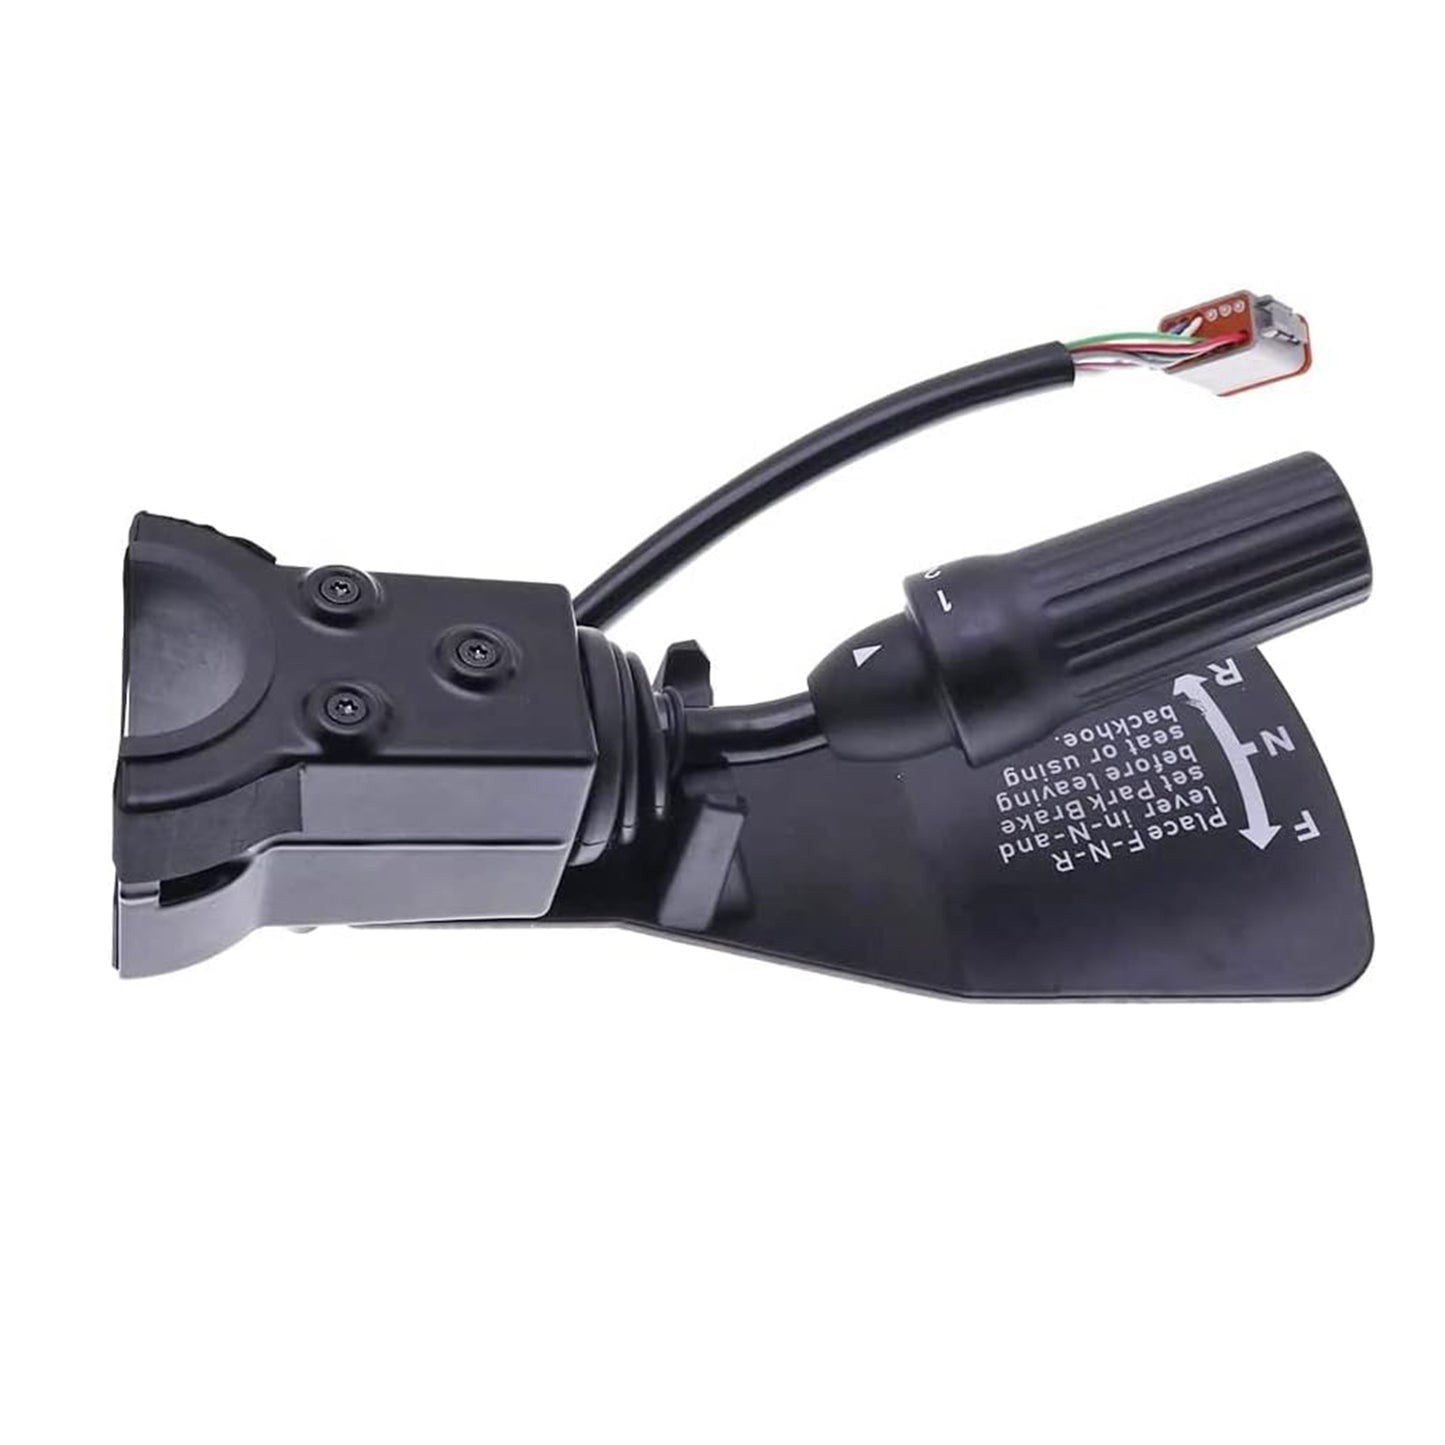 AT432901 Transmission Motion Control Switch Compatible With John Deere 210K 210K EP 210LE